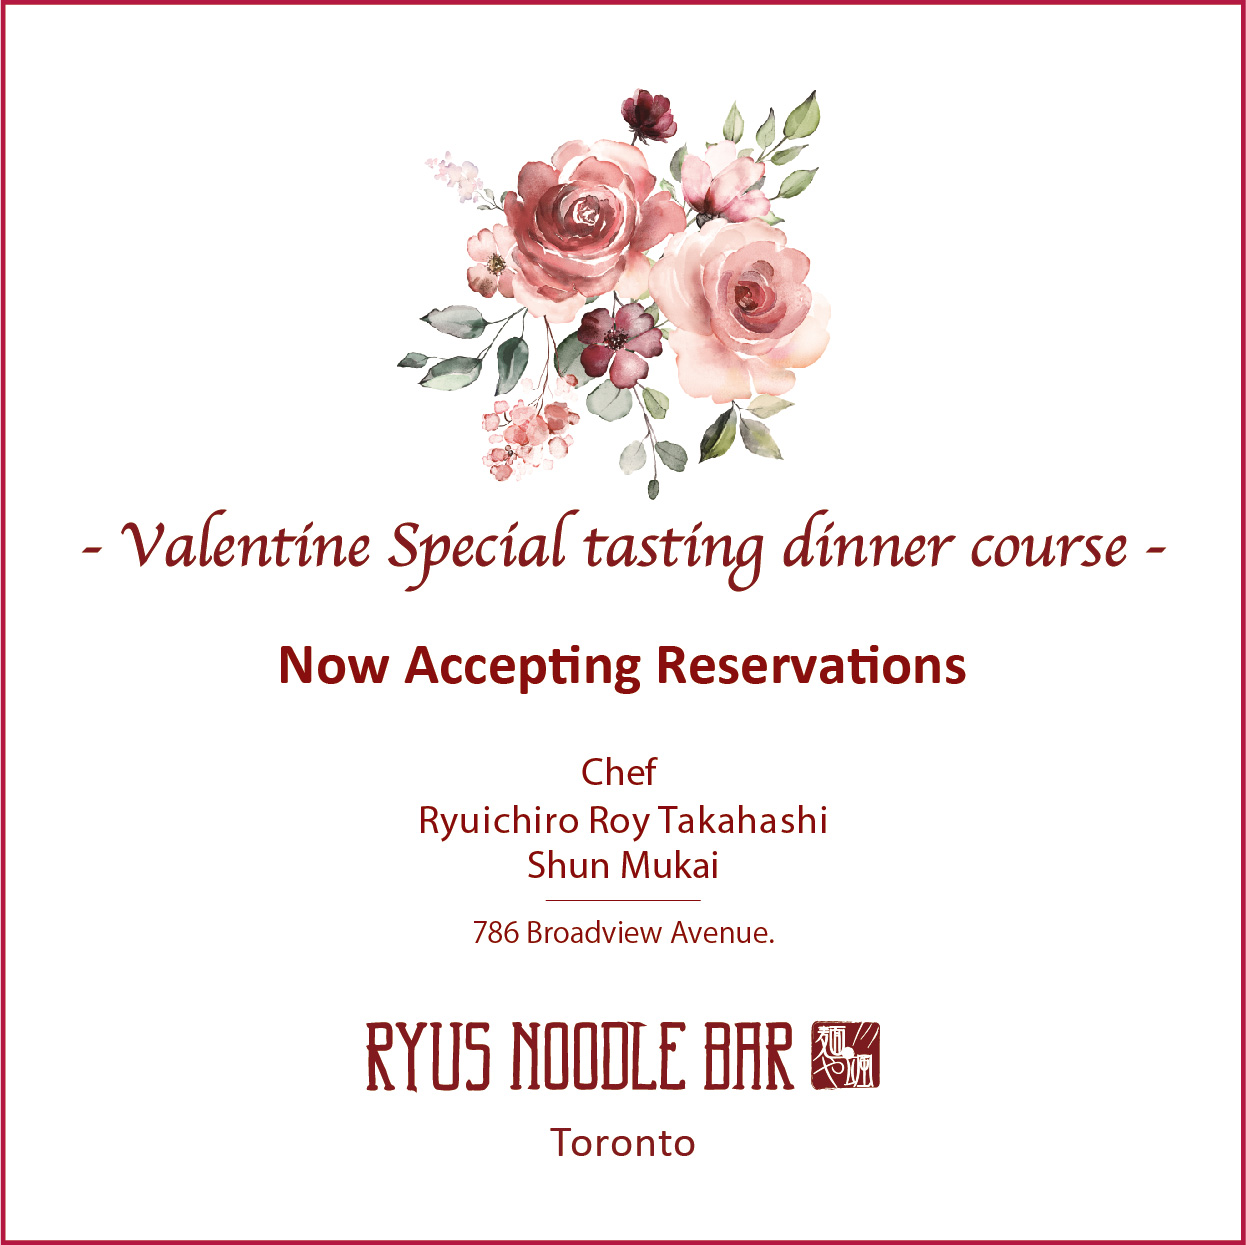 [Reservations] Valentine Special tasting dinner course – RYUS Noodle Bar at Broadview